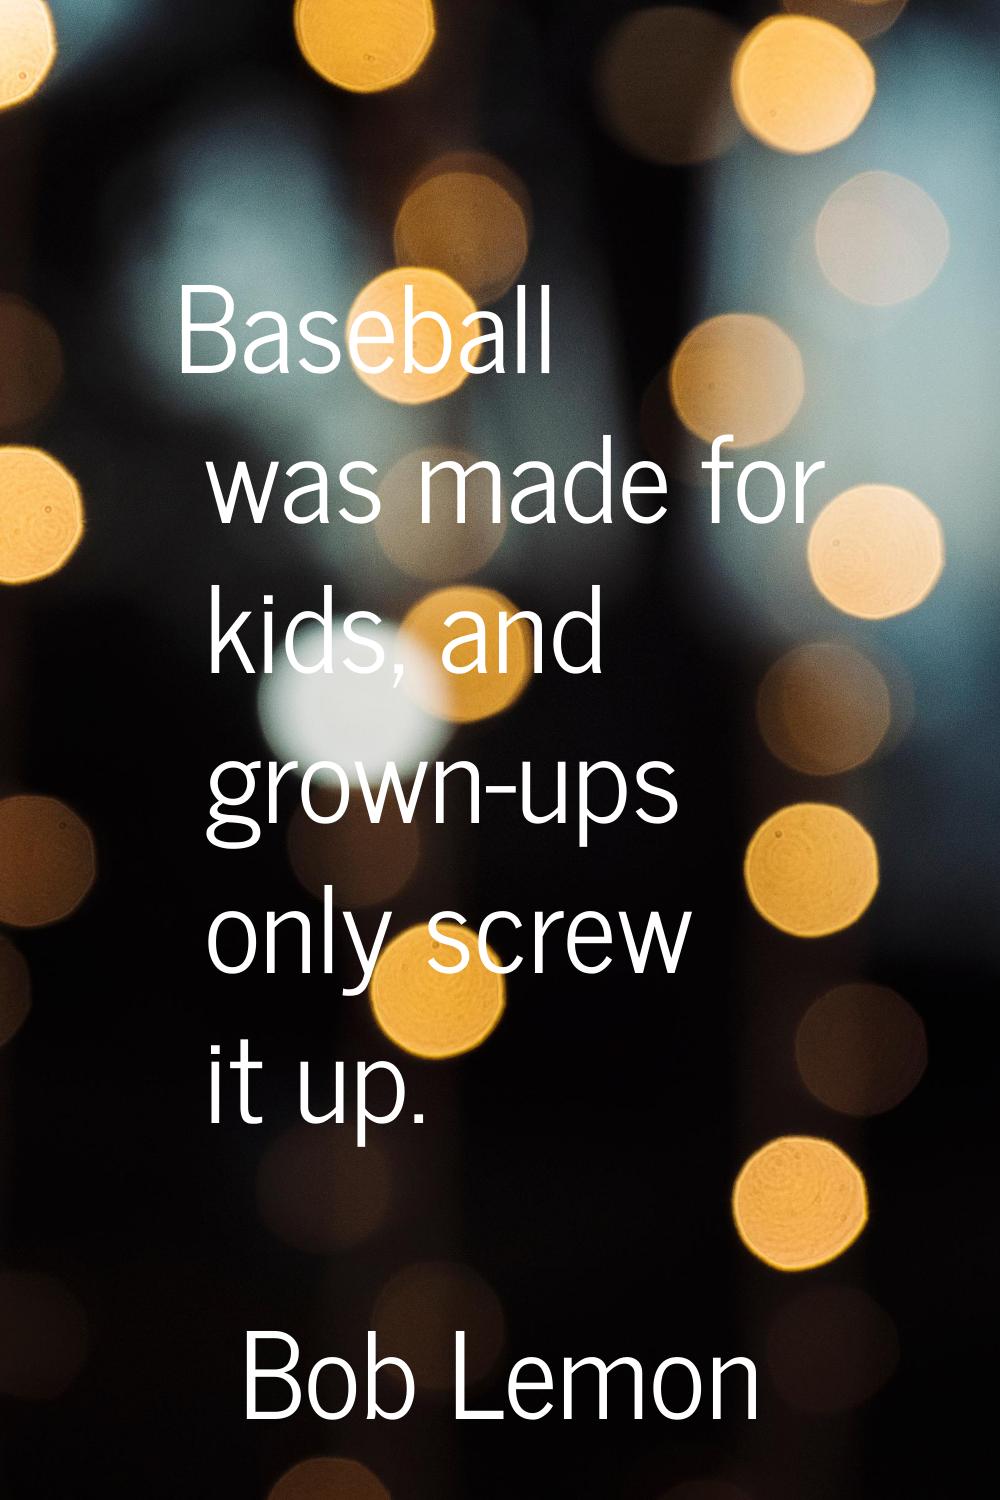 Baseball was made for kids, and grown-ups only screw it up.